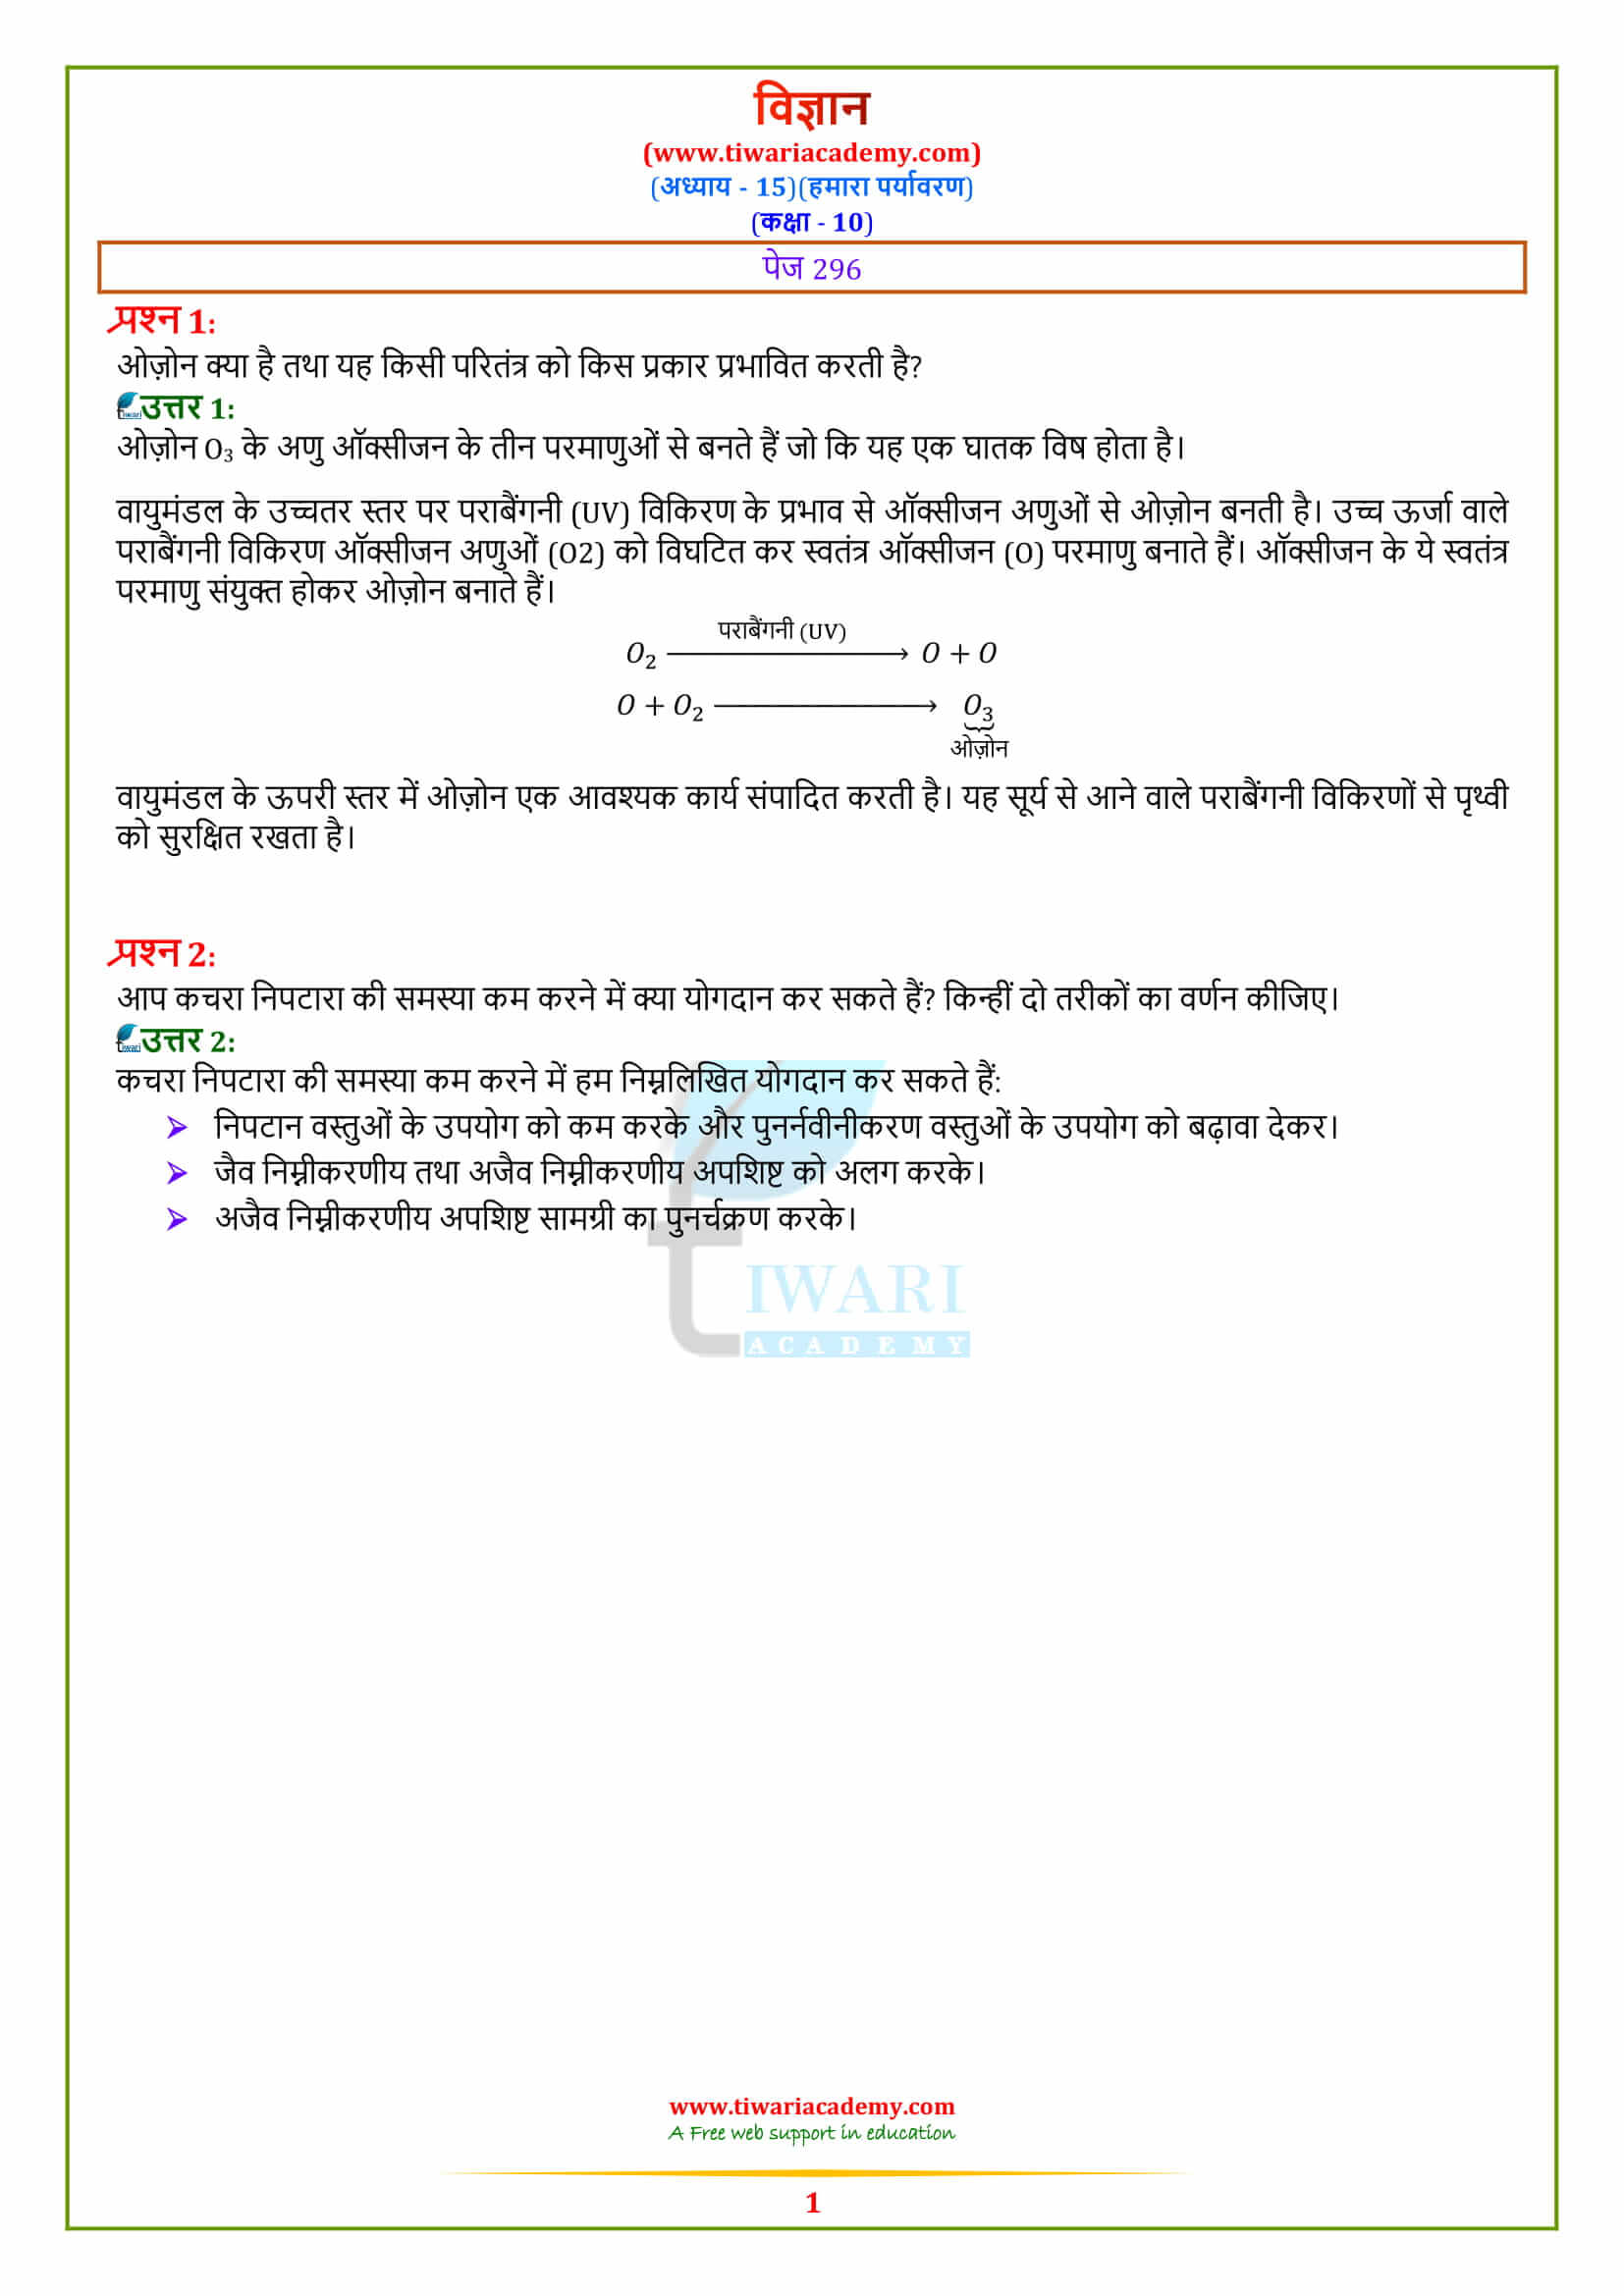 Class 10 Science Chapter 15 page 296